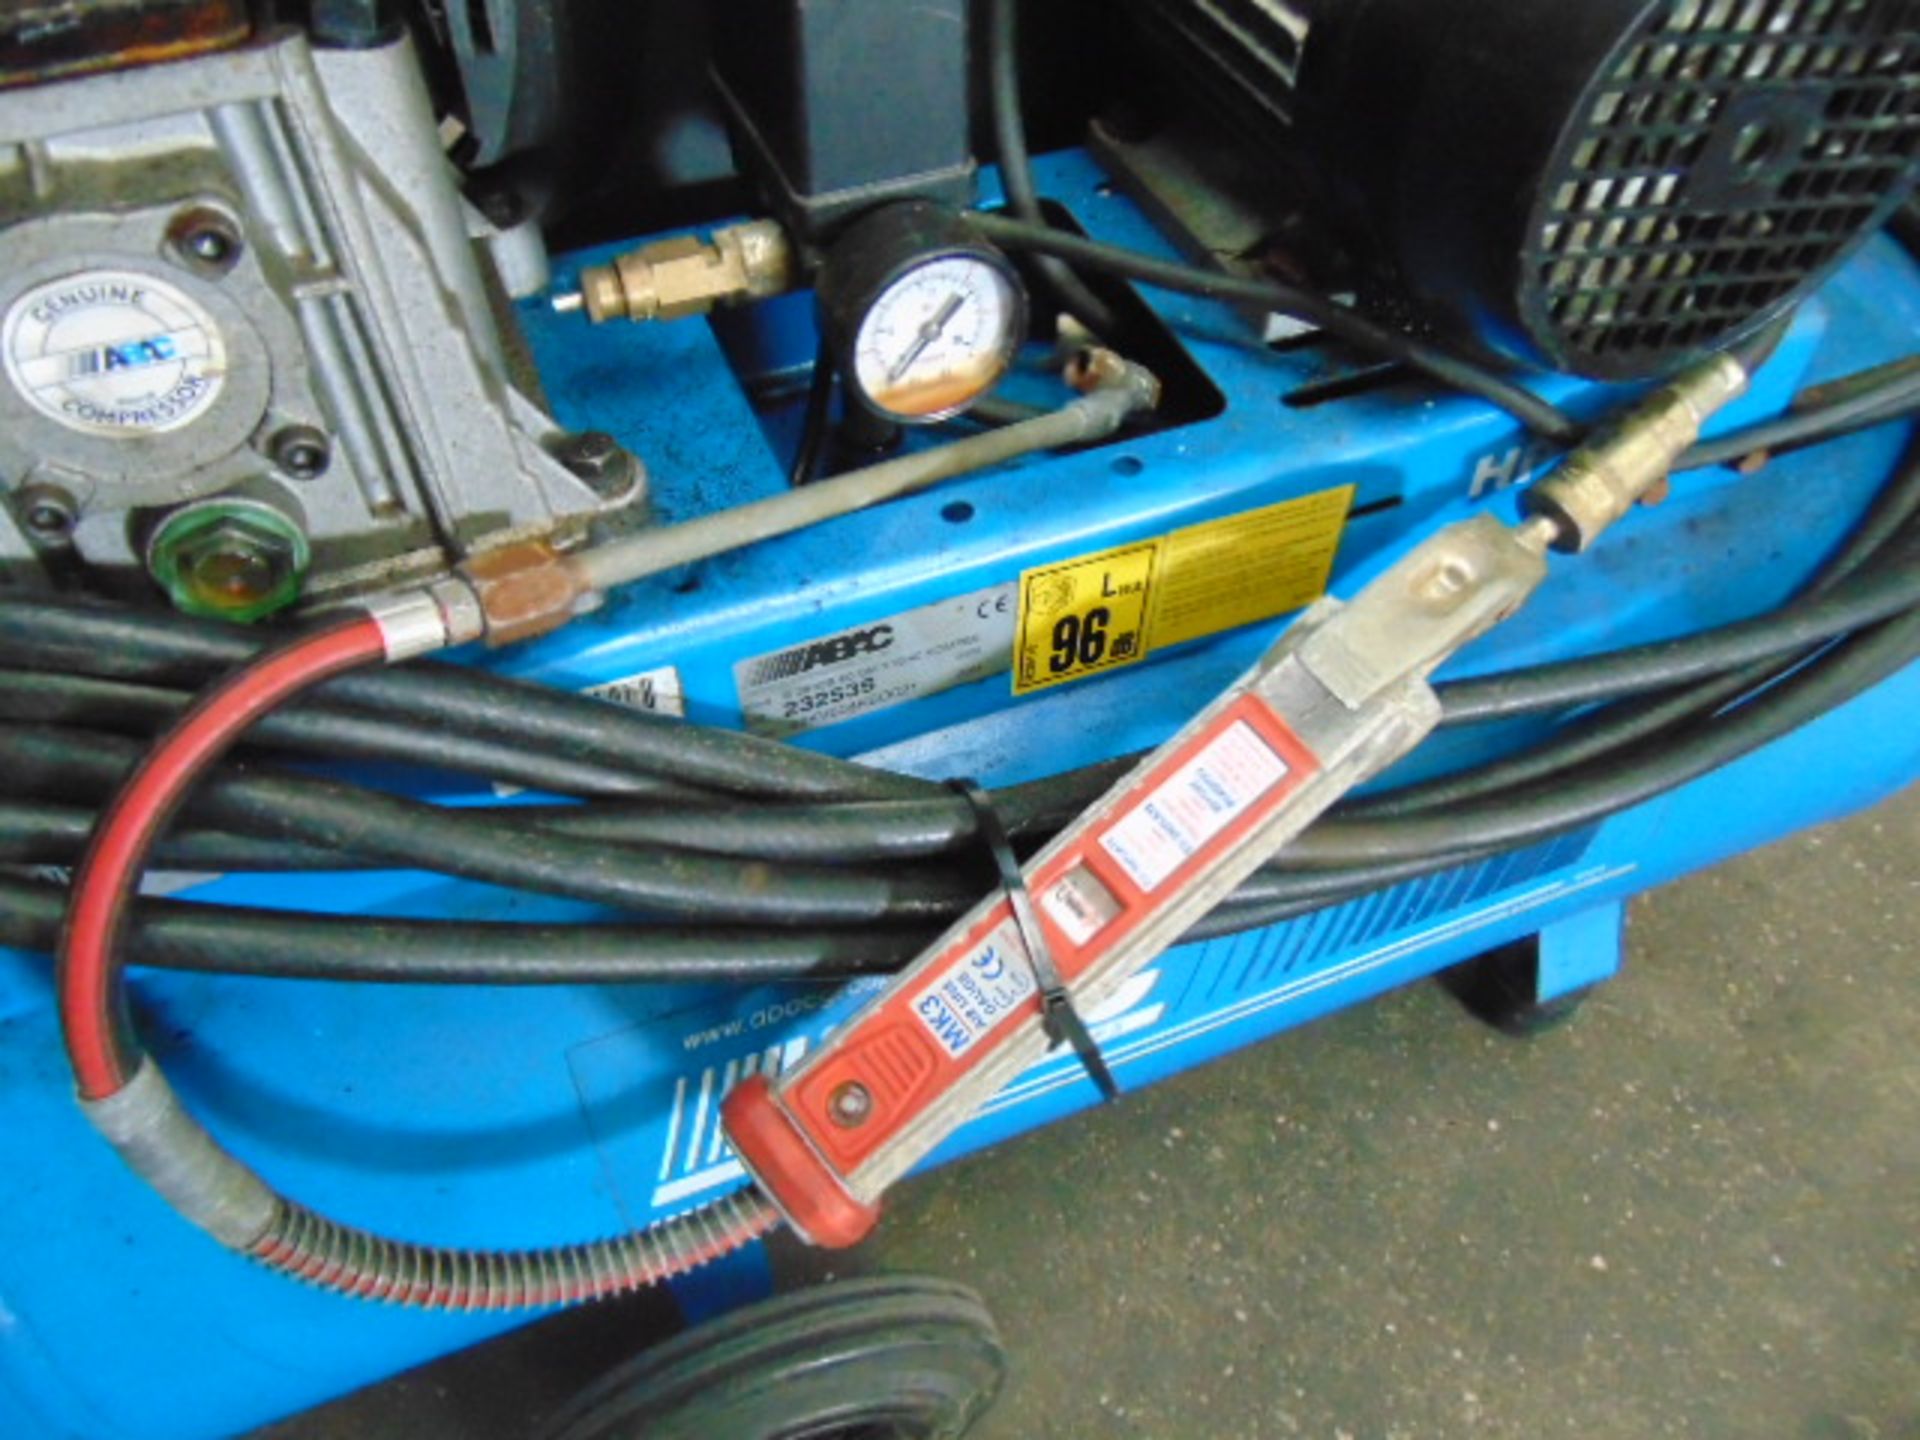 ABAC B 2800B-60 cm 3 V240 Kompex Mobile Air Compressor with PCL Mk 3 Inflator - Image 6 of 9